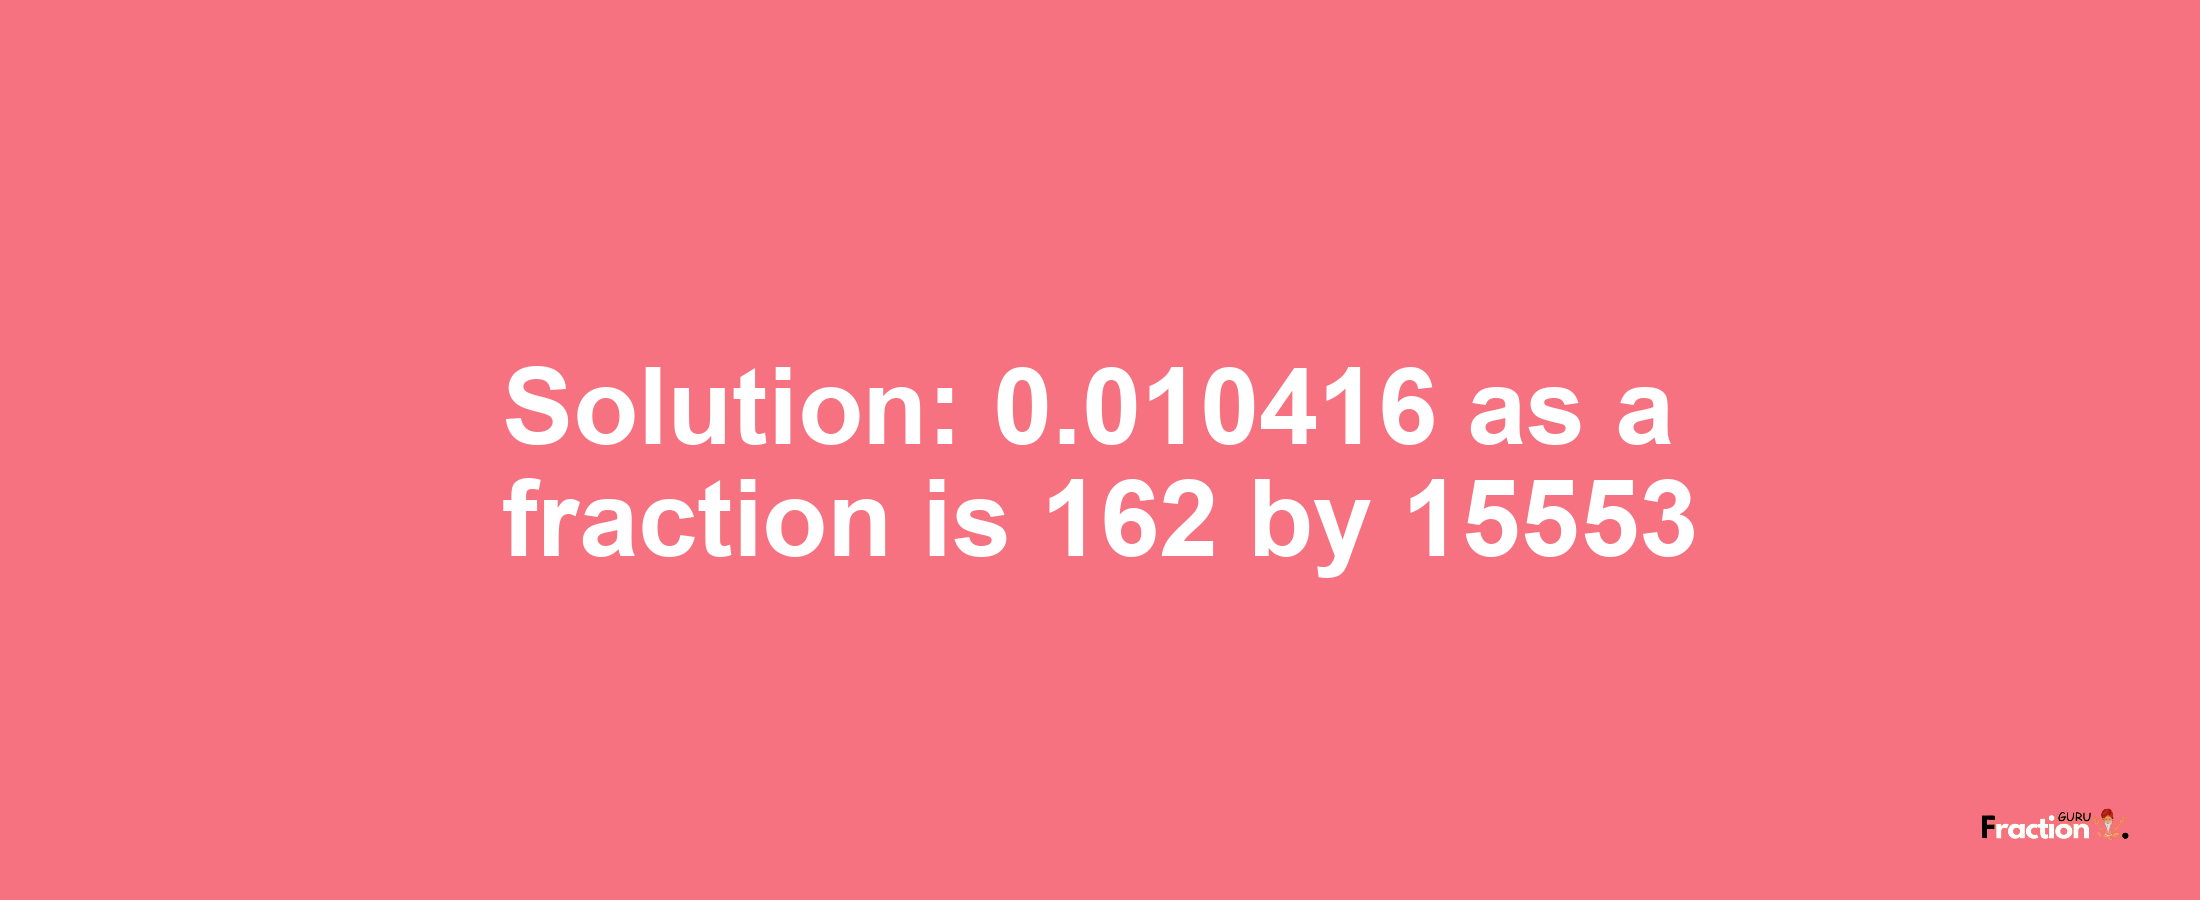 Solution:0.010416 as a fraction is 162/15553